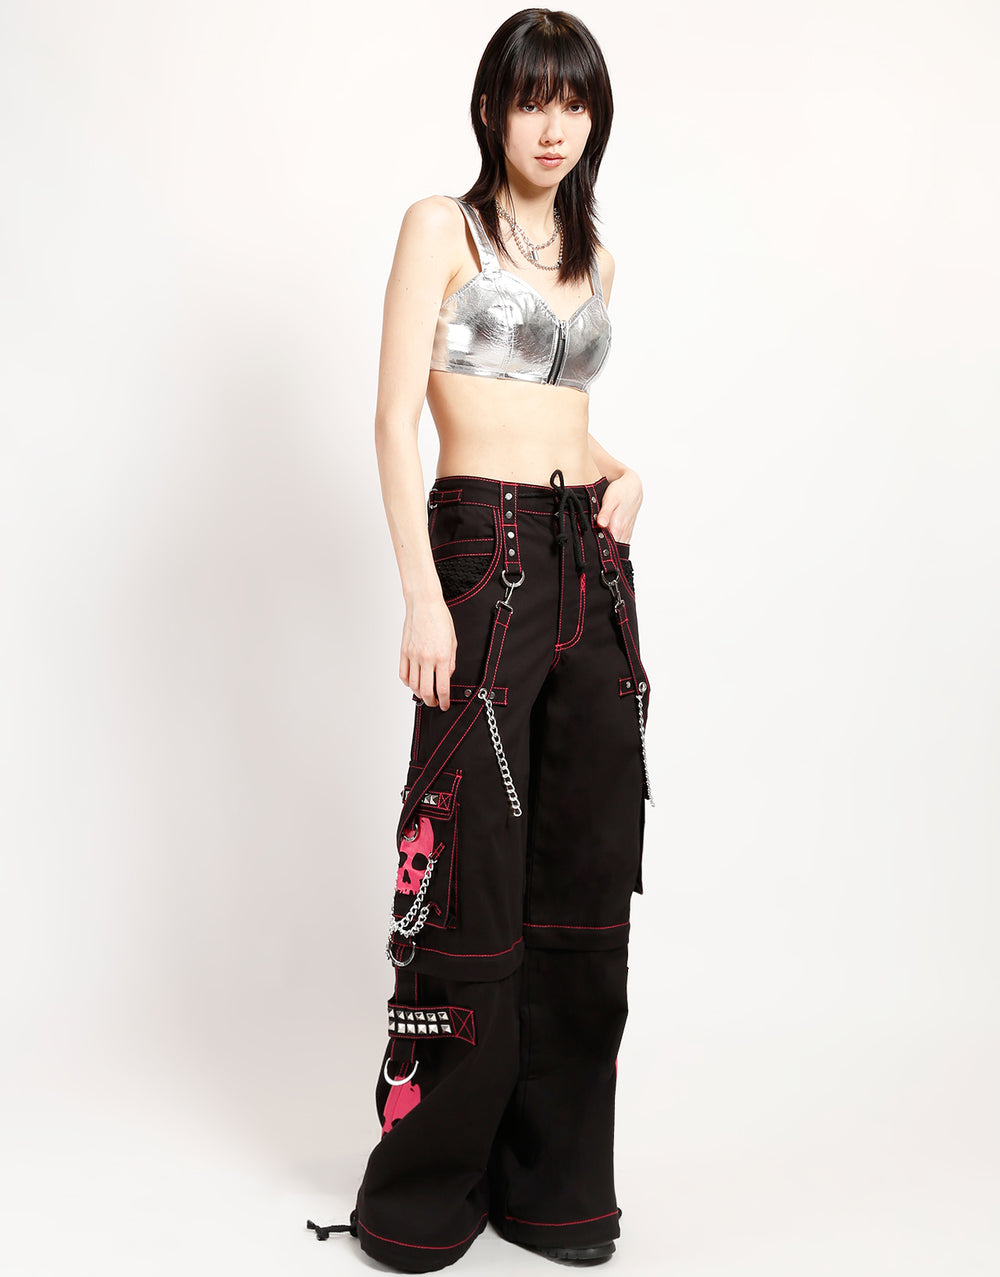 FAUX LEATHER METALLIC EXTRA CROP TOP